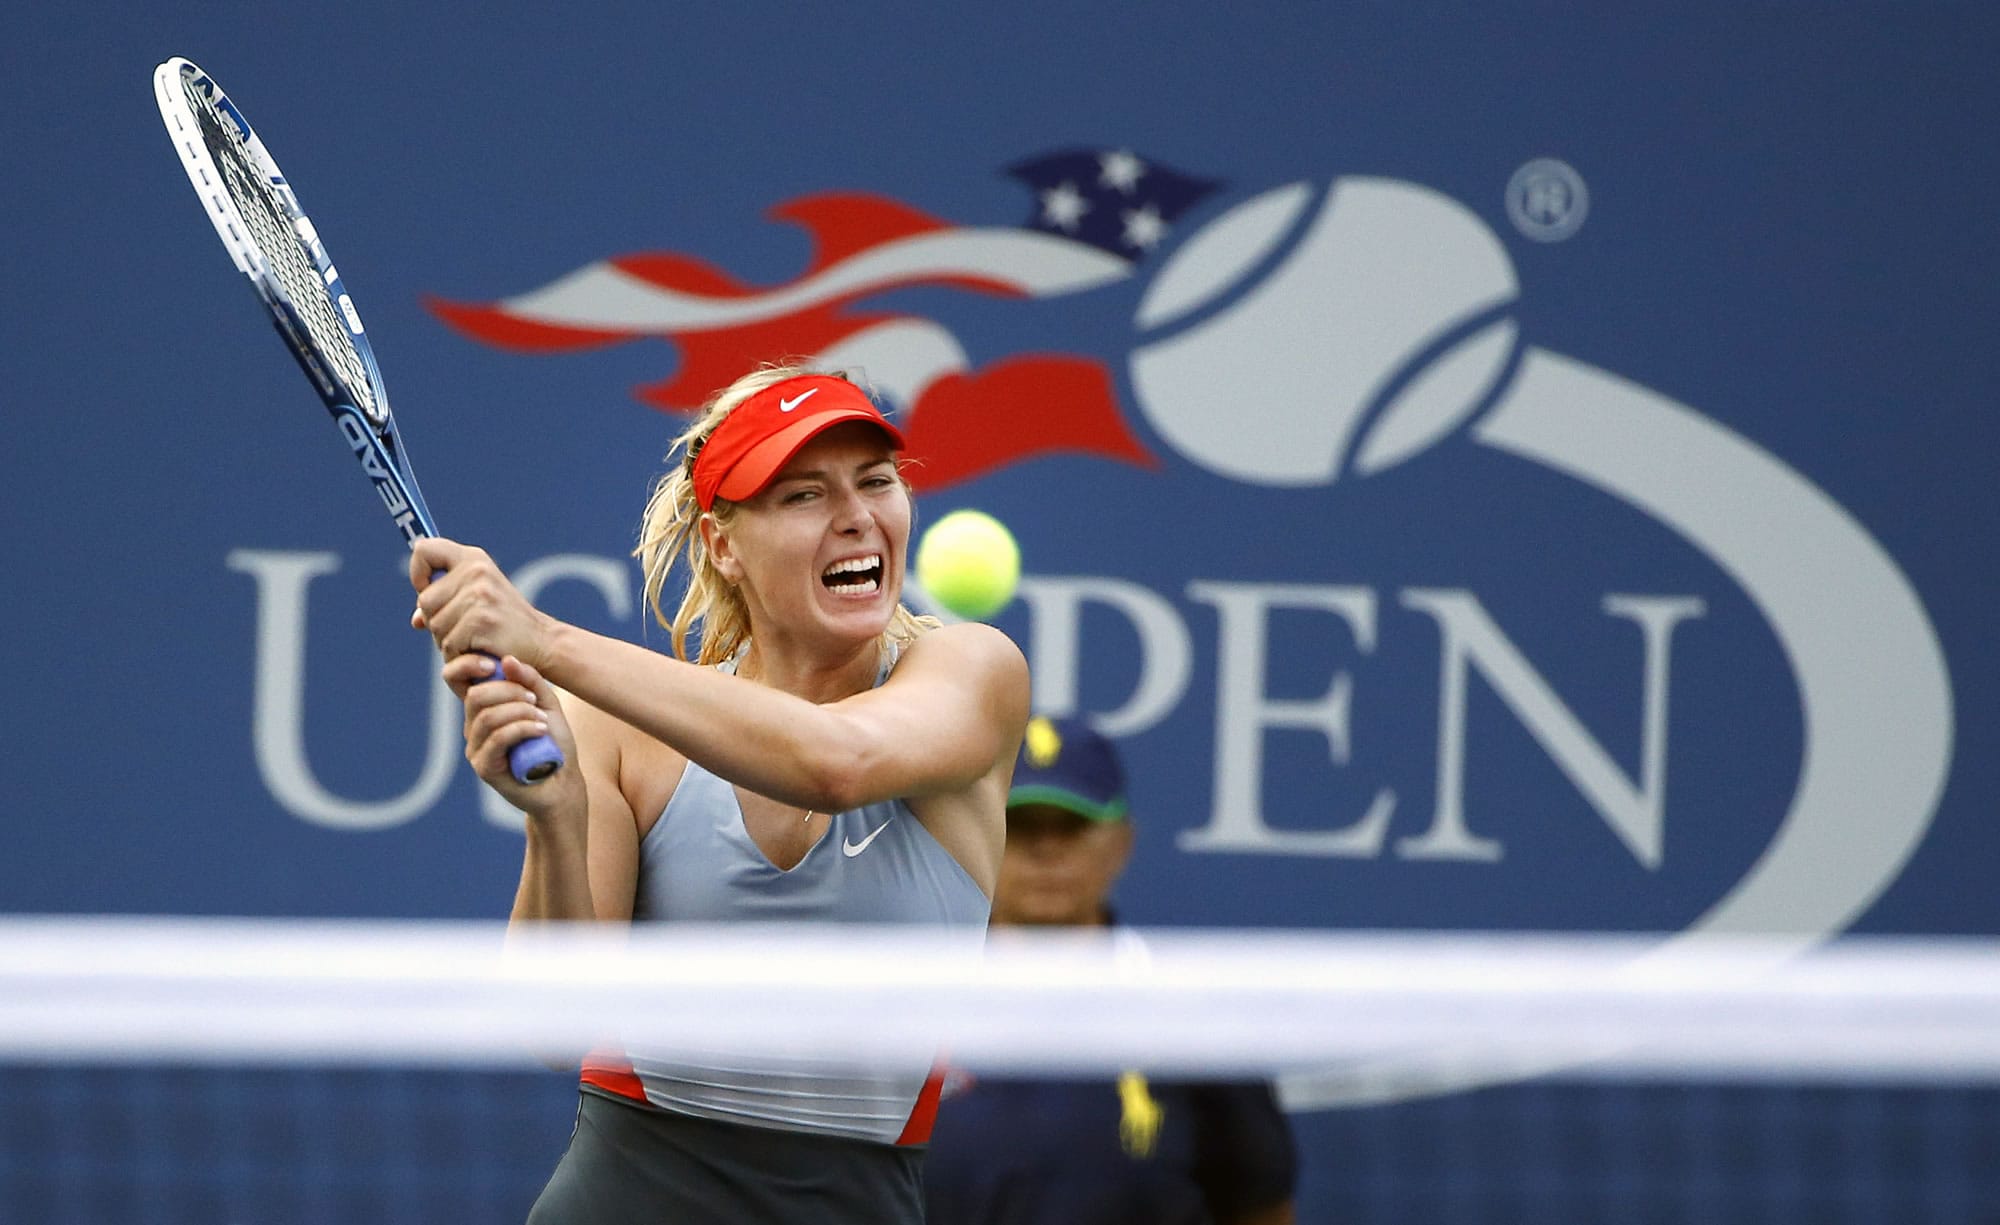 Maria Sharapova, of Russia, has been granted a wild-card invitation for the U.S. Open's main draw. Sharapova is among eight women who were given entry into the 128-player field by the U.S. Tennis Association on Tuesday, Aug. 15, 2017, and by far the most noteworthy.